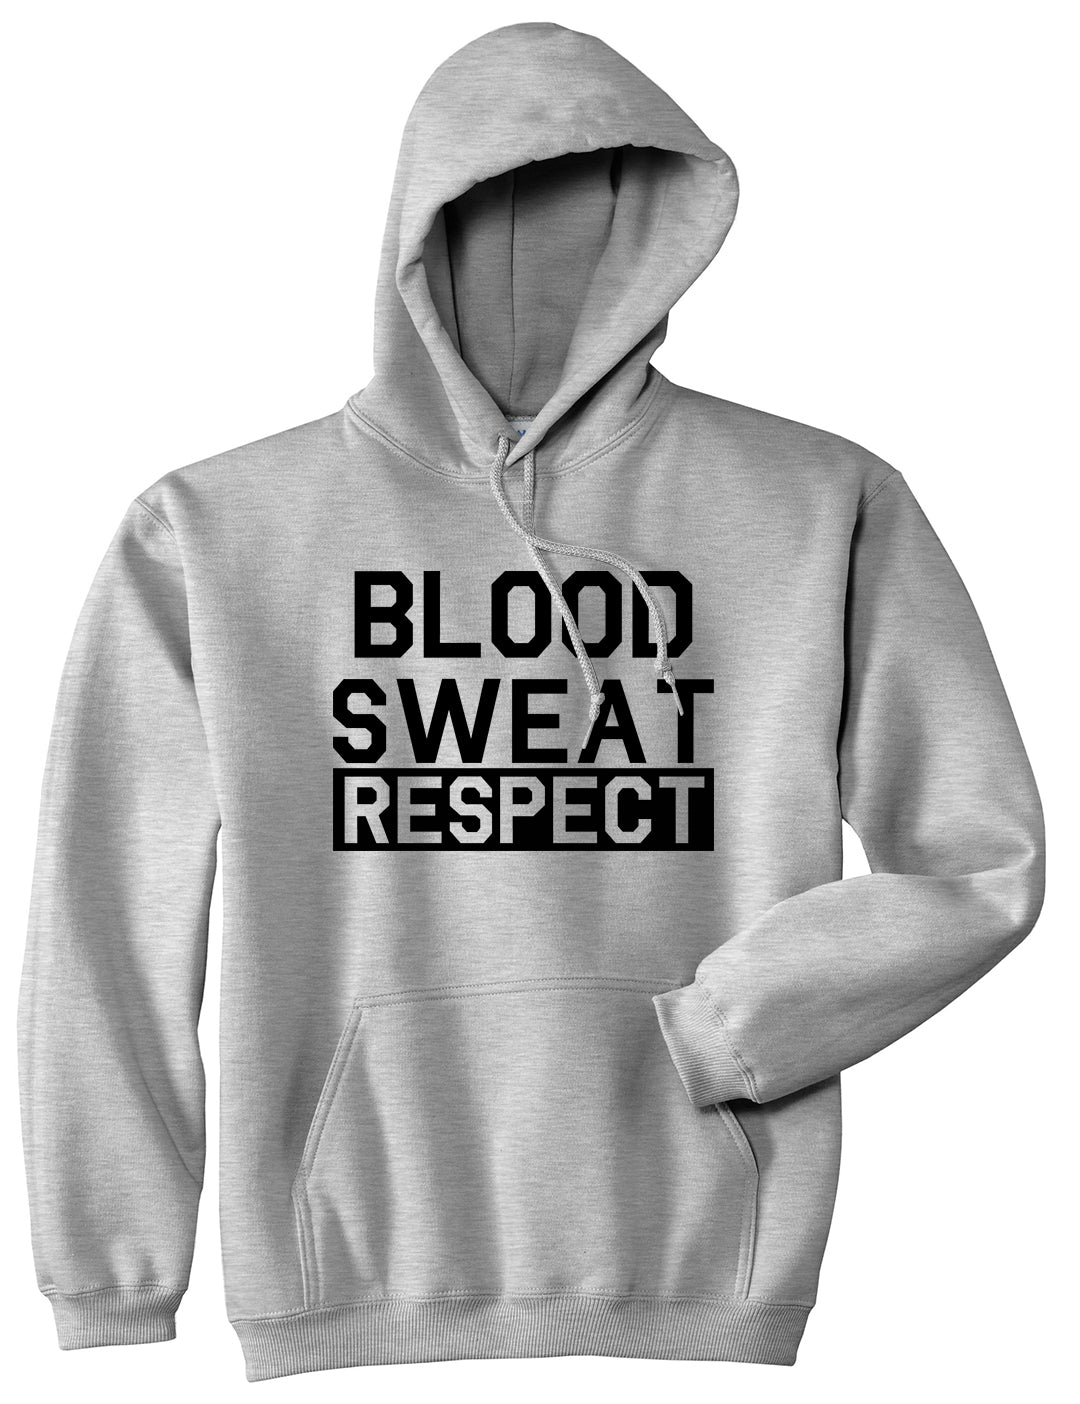 Blood Sweat Respect Gym Workout Mens Pullover Hoodie Grey by Kings Of NY